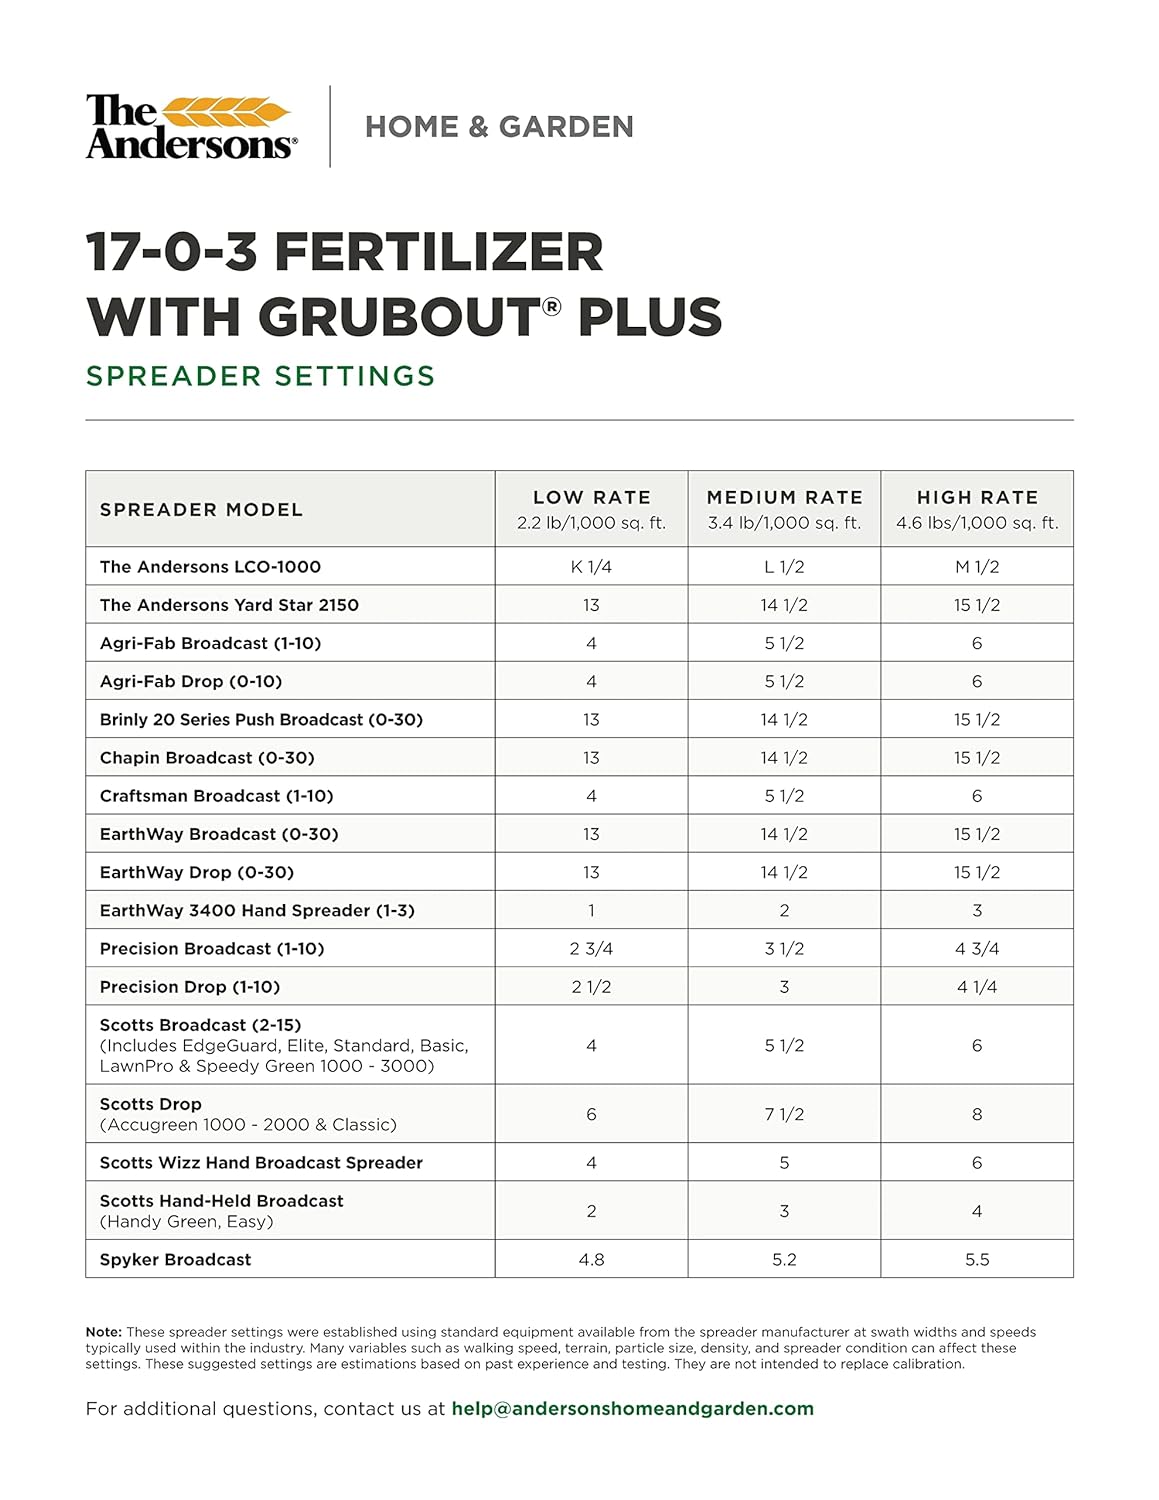 The Andersons Professional 17-0-3 Fertilizer with Grubout Plus 18,100 sq ft (40lb) - The Ultimate Lawn Care Solution